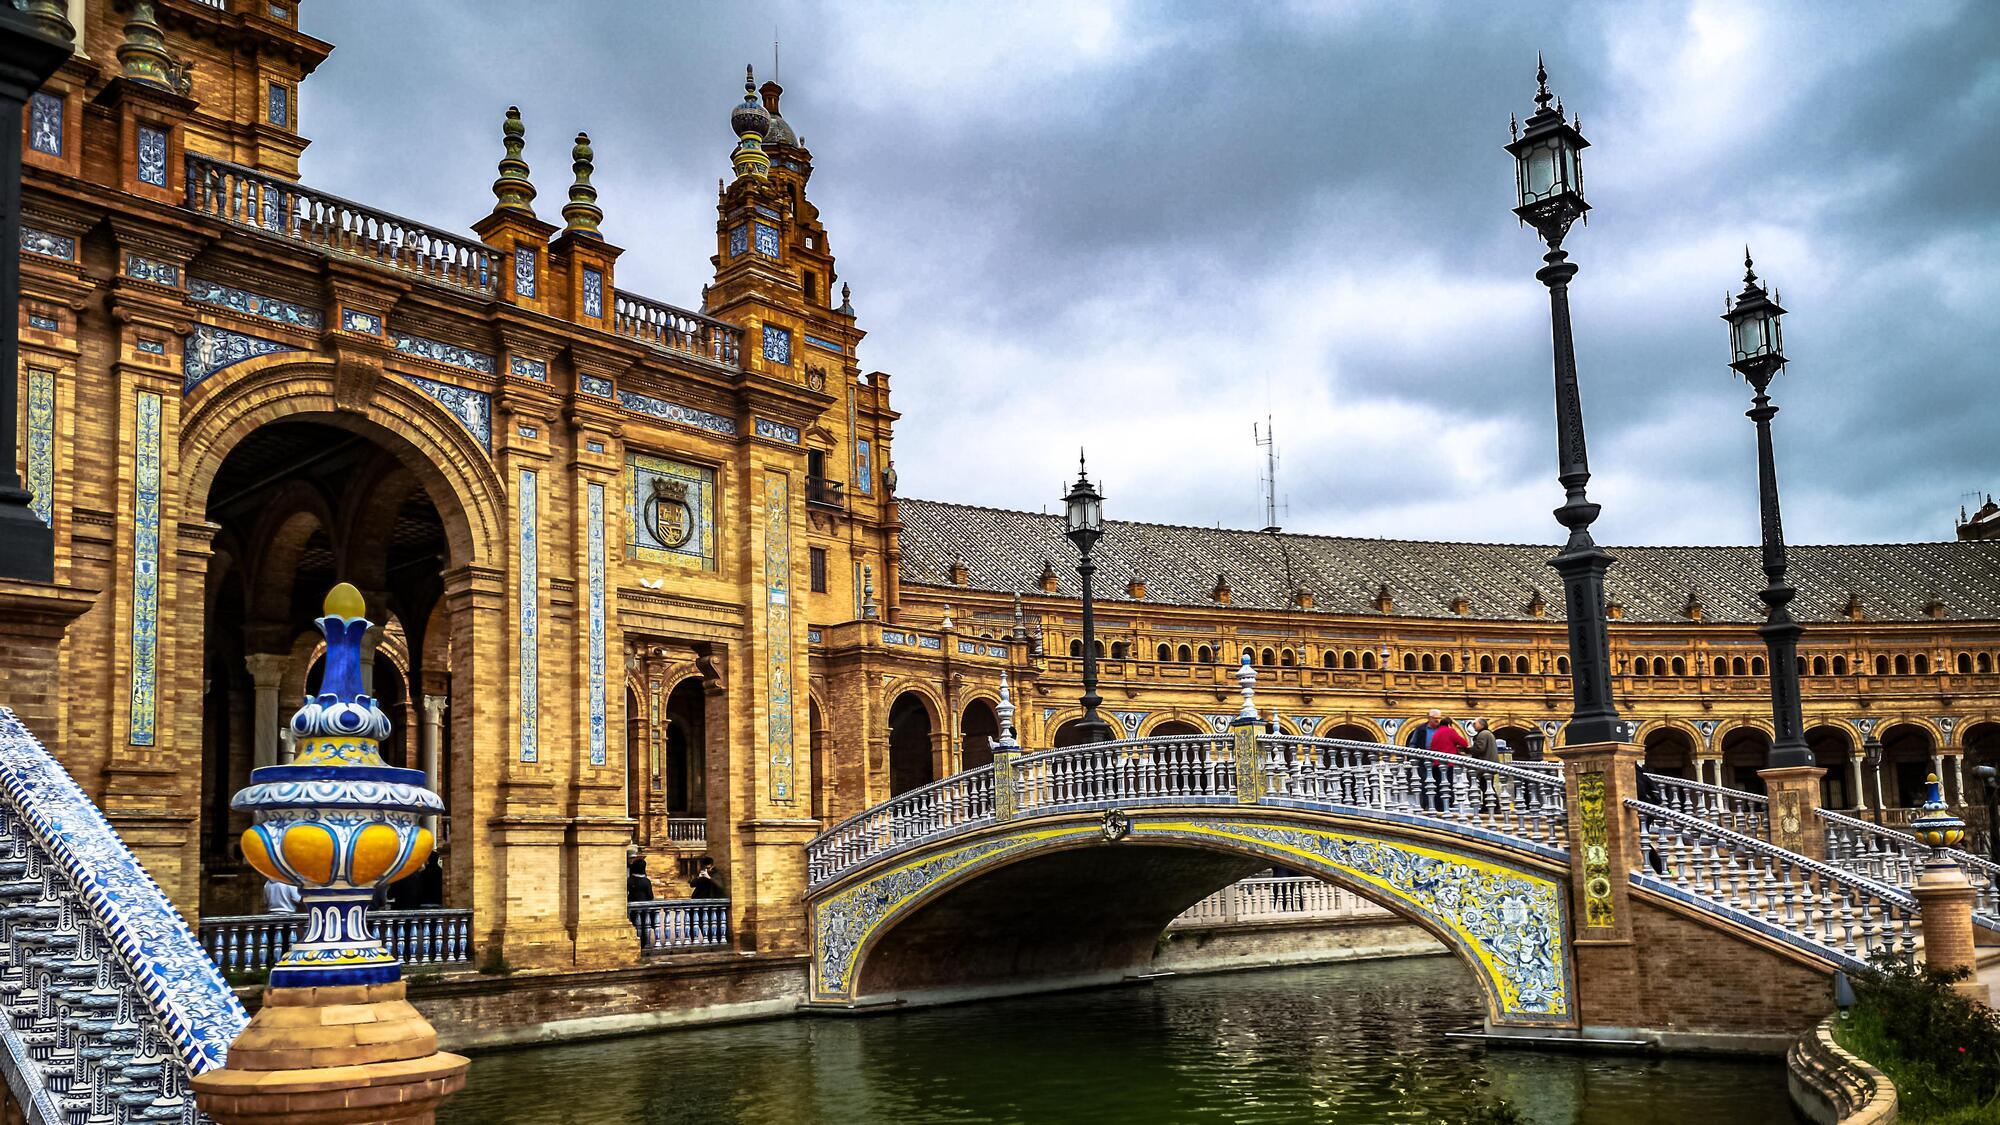 Care for a walk? Top 5 European cities with the best walking routes